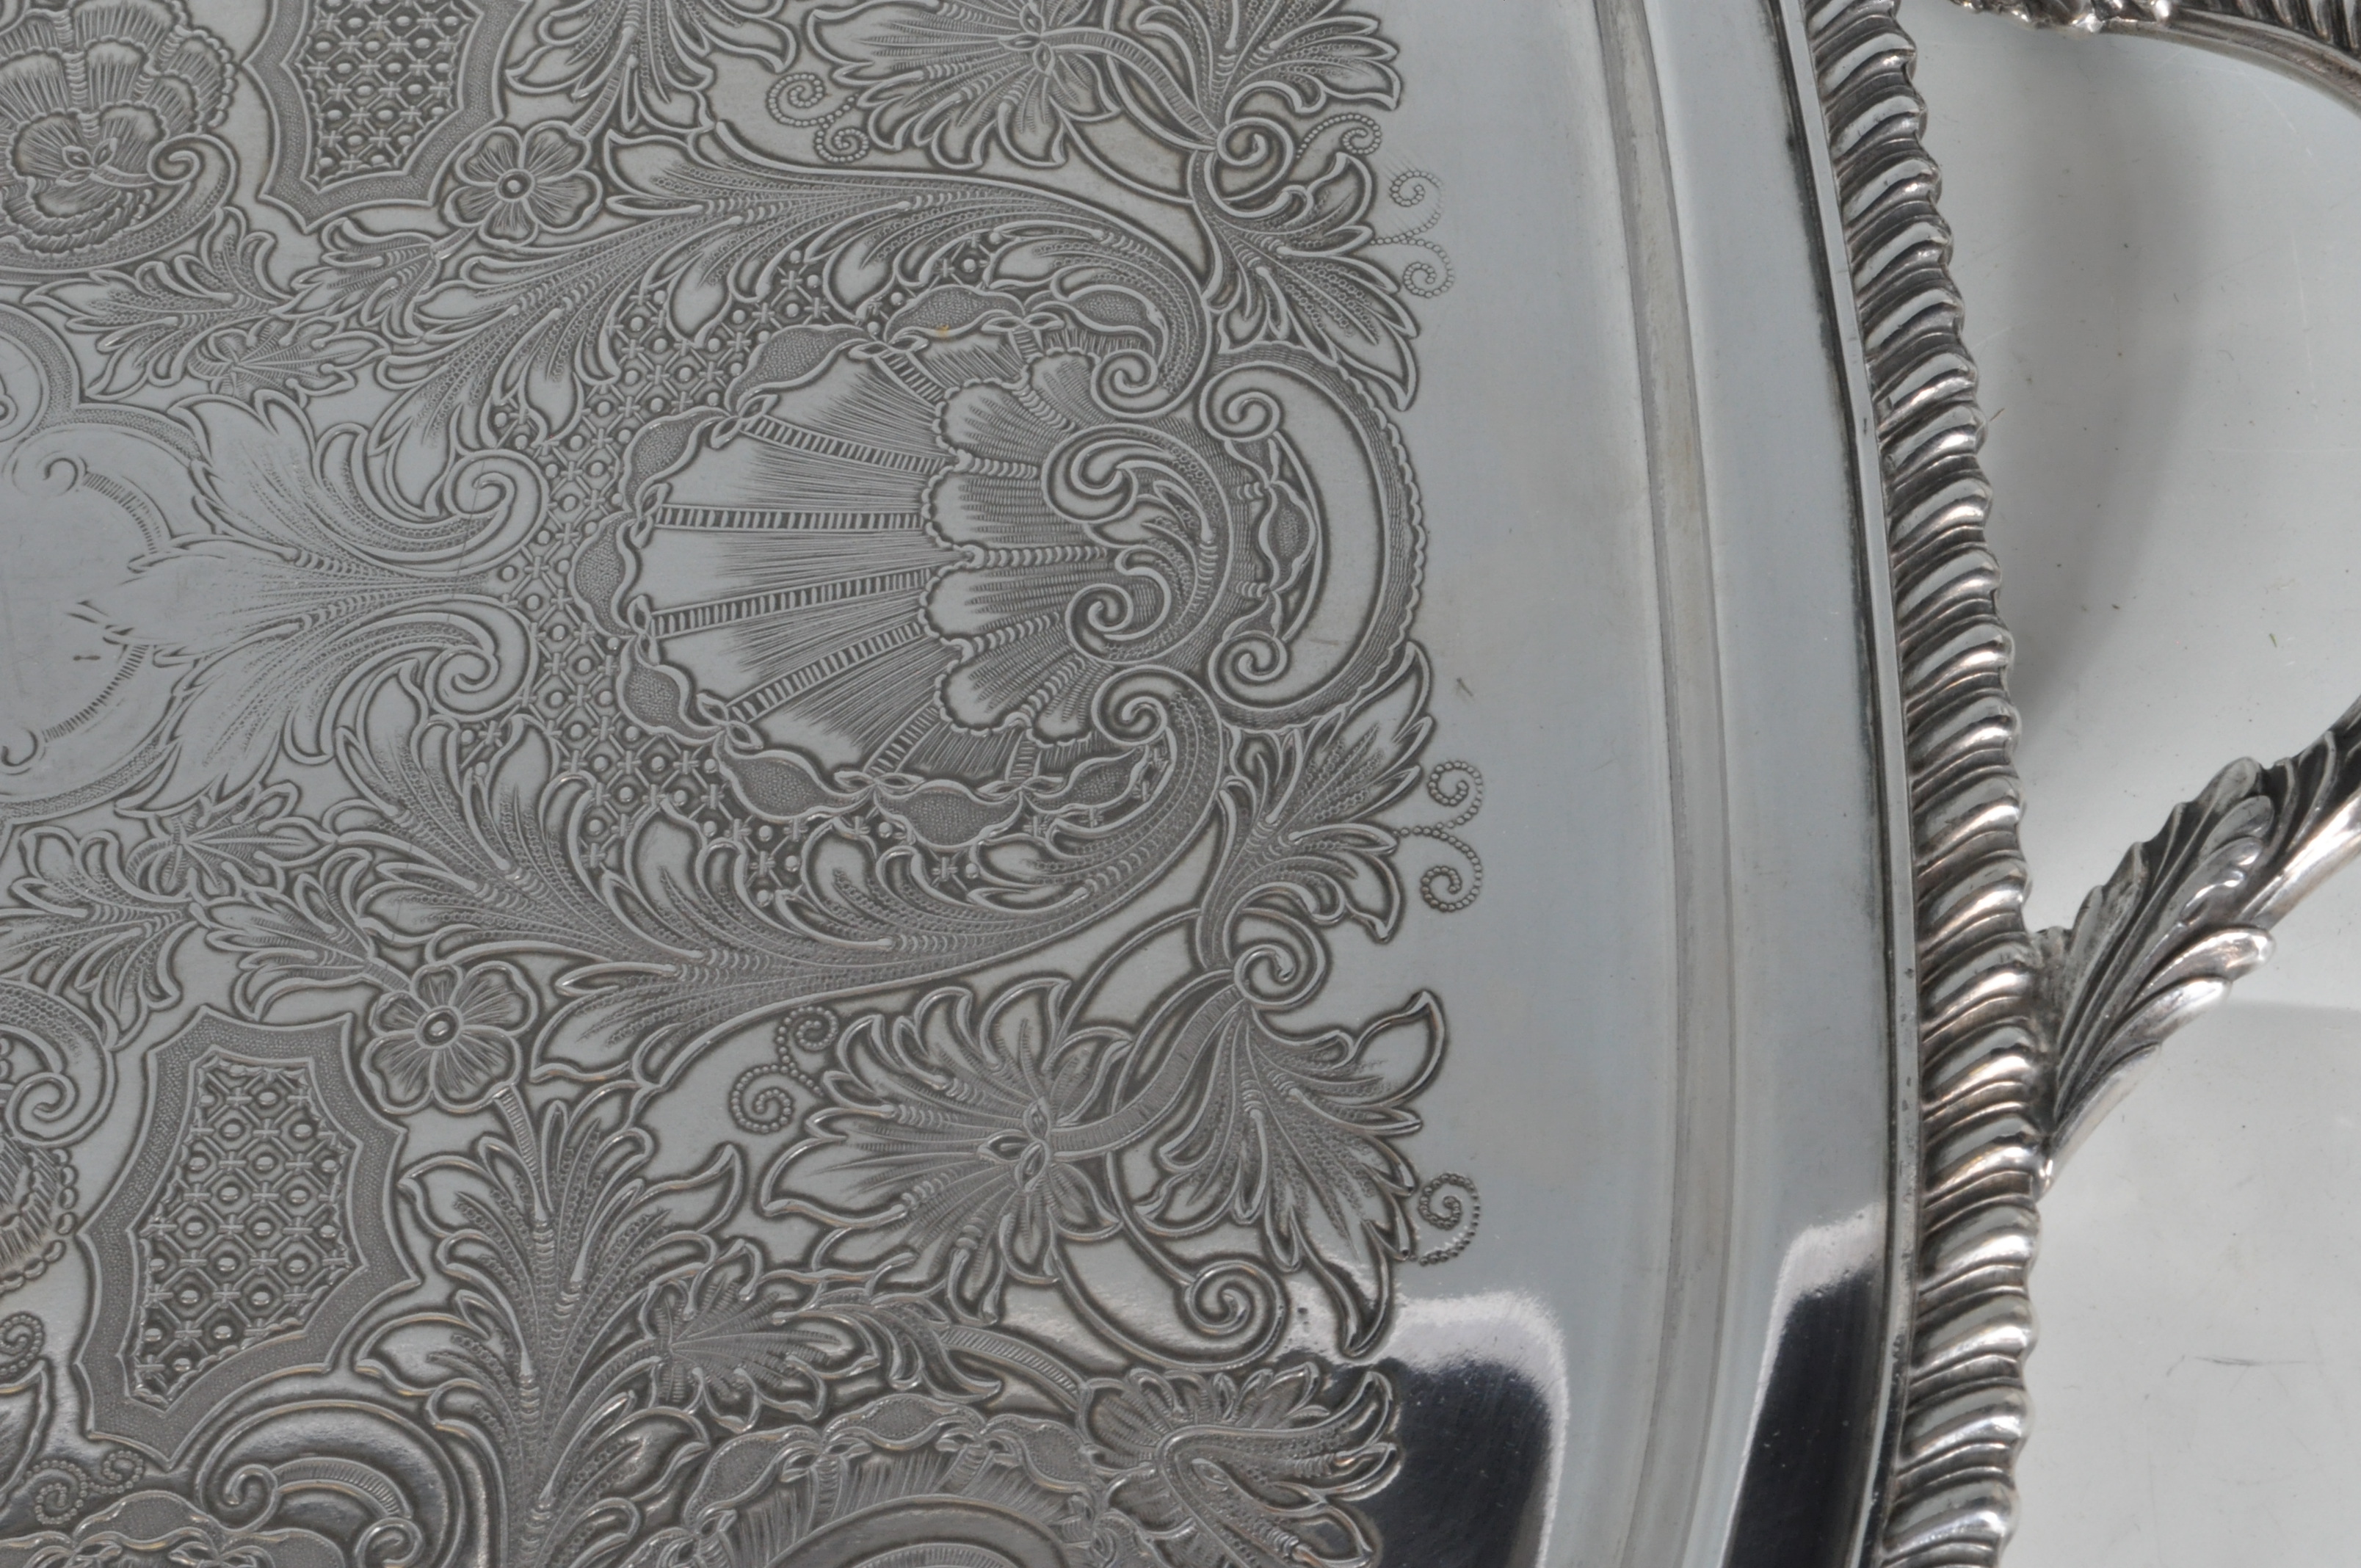 LARGE VINTAGE SILVER PLATE MERIDON SERVING TRAY. - Image 10 of 15